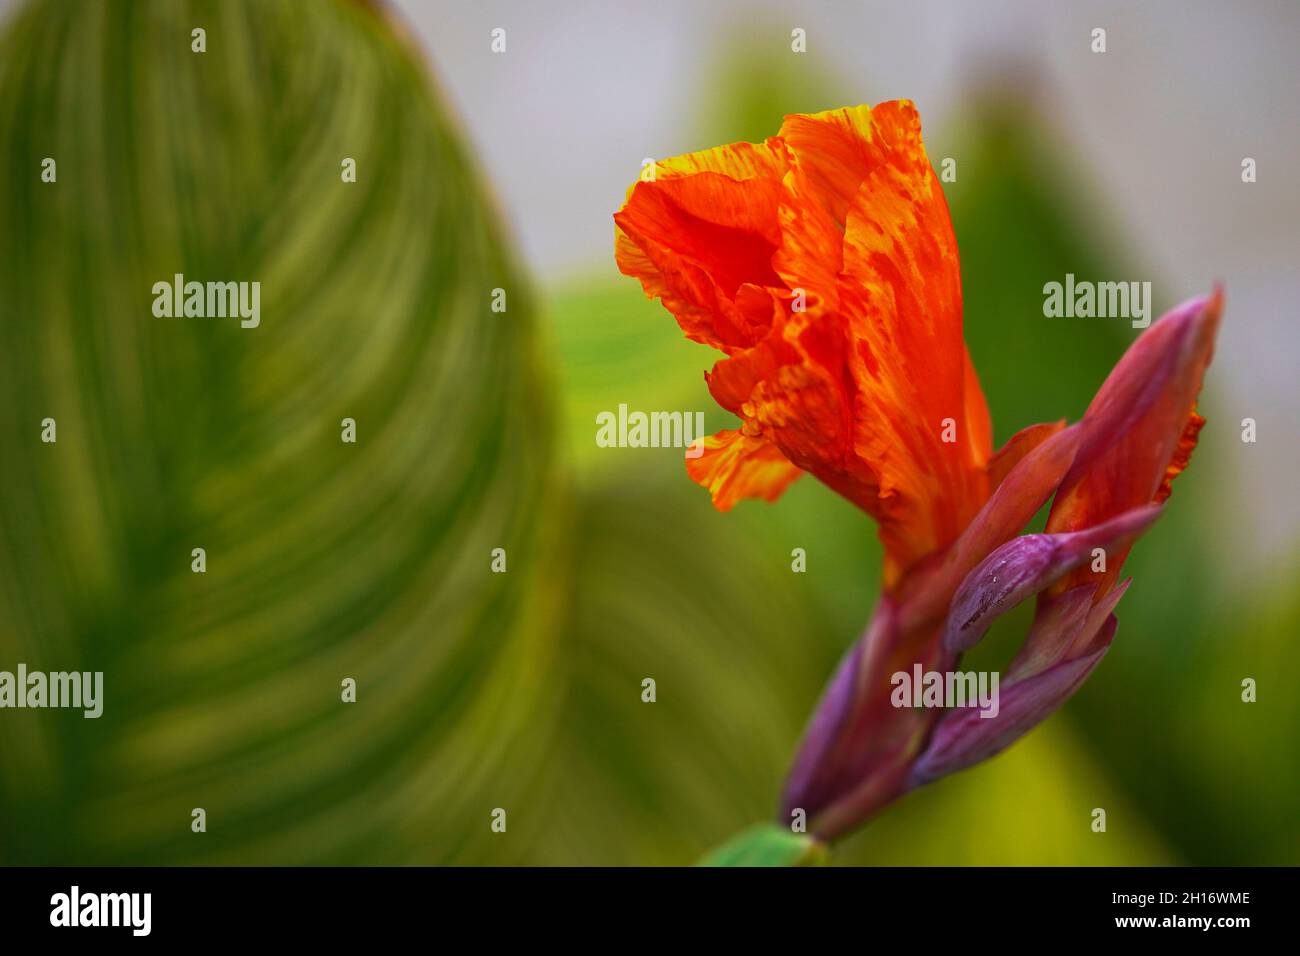 Tropical canna flower and leaves background. Cannaceae. Canna lily flower leaf abstract. Stock Photo